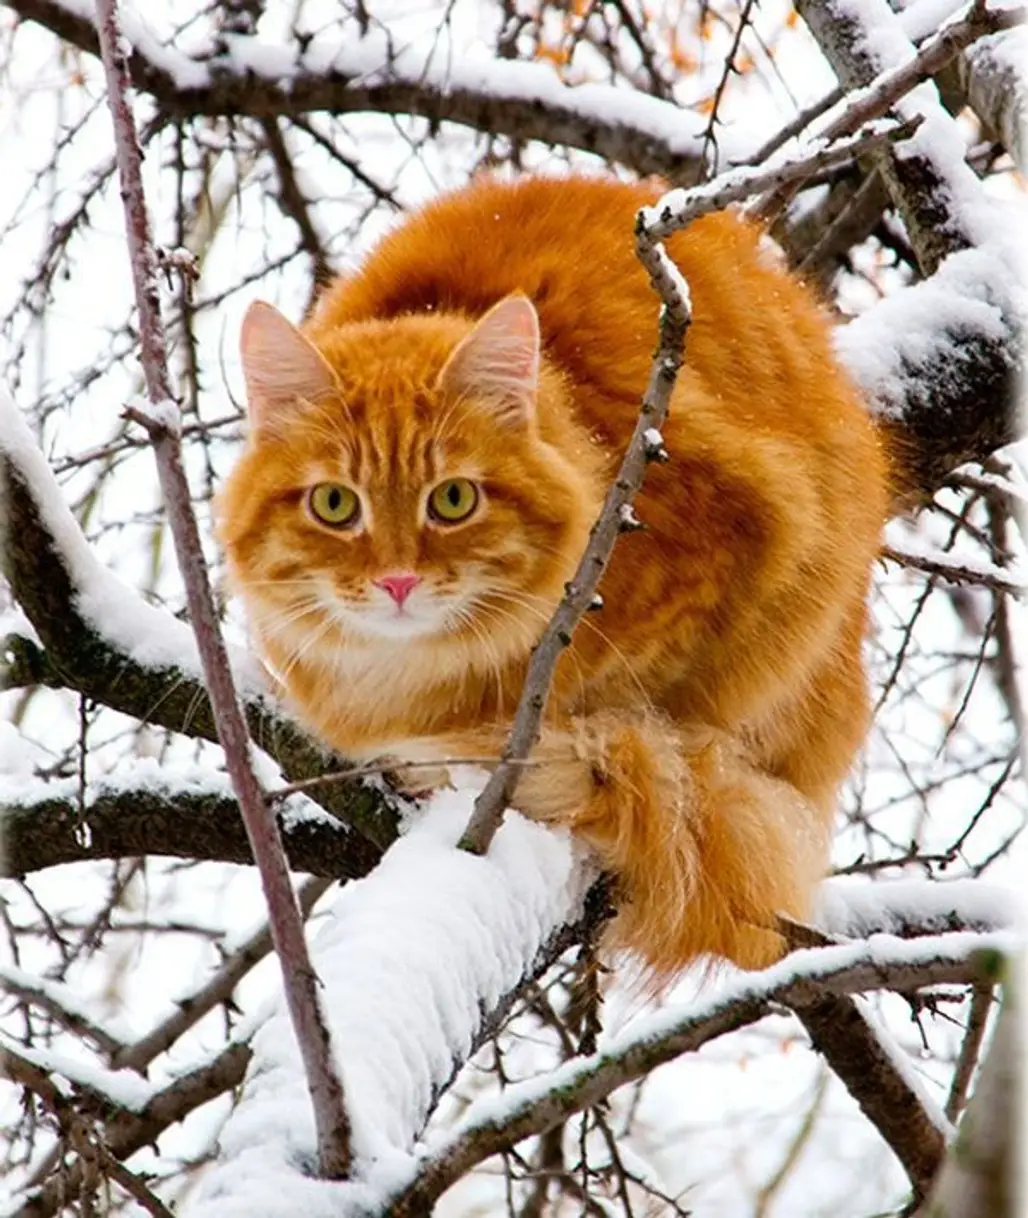 "I've Been Stuck in This Tree for Hours"